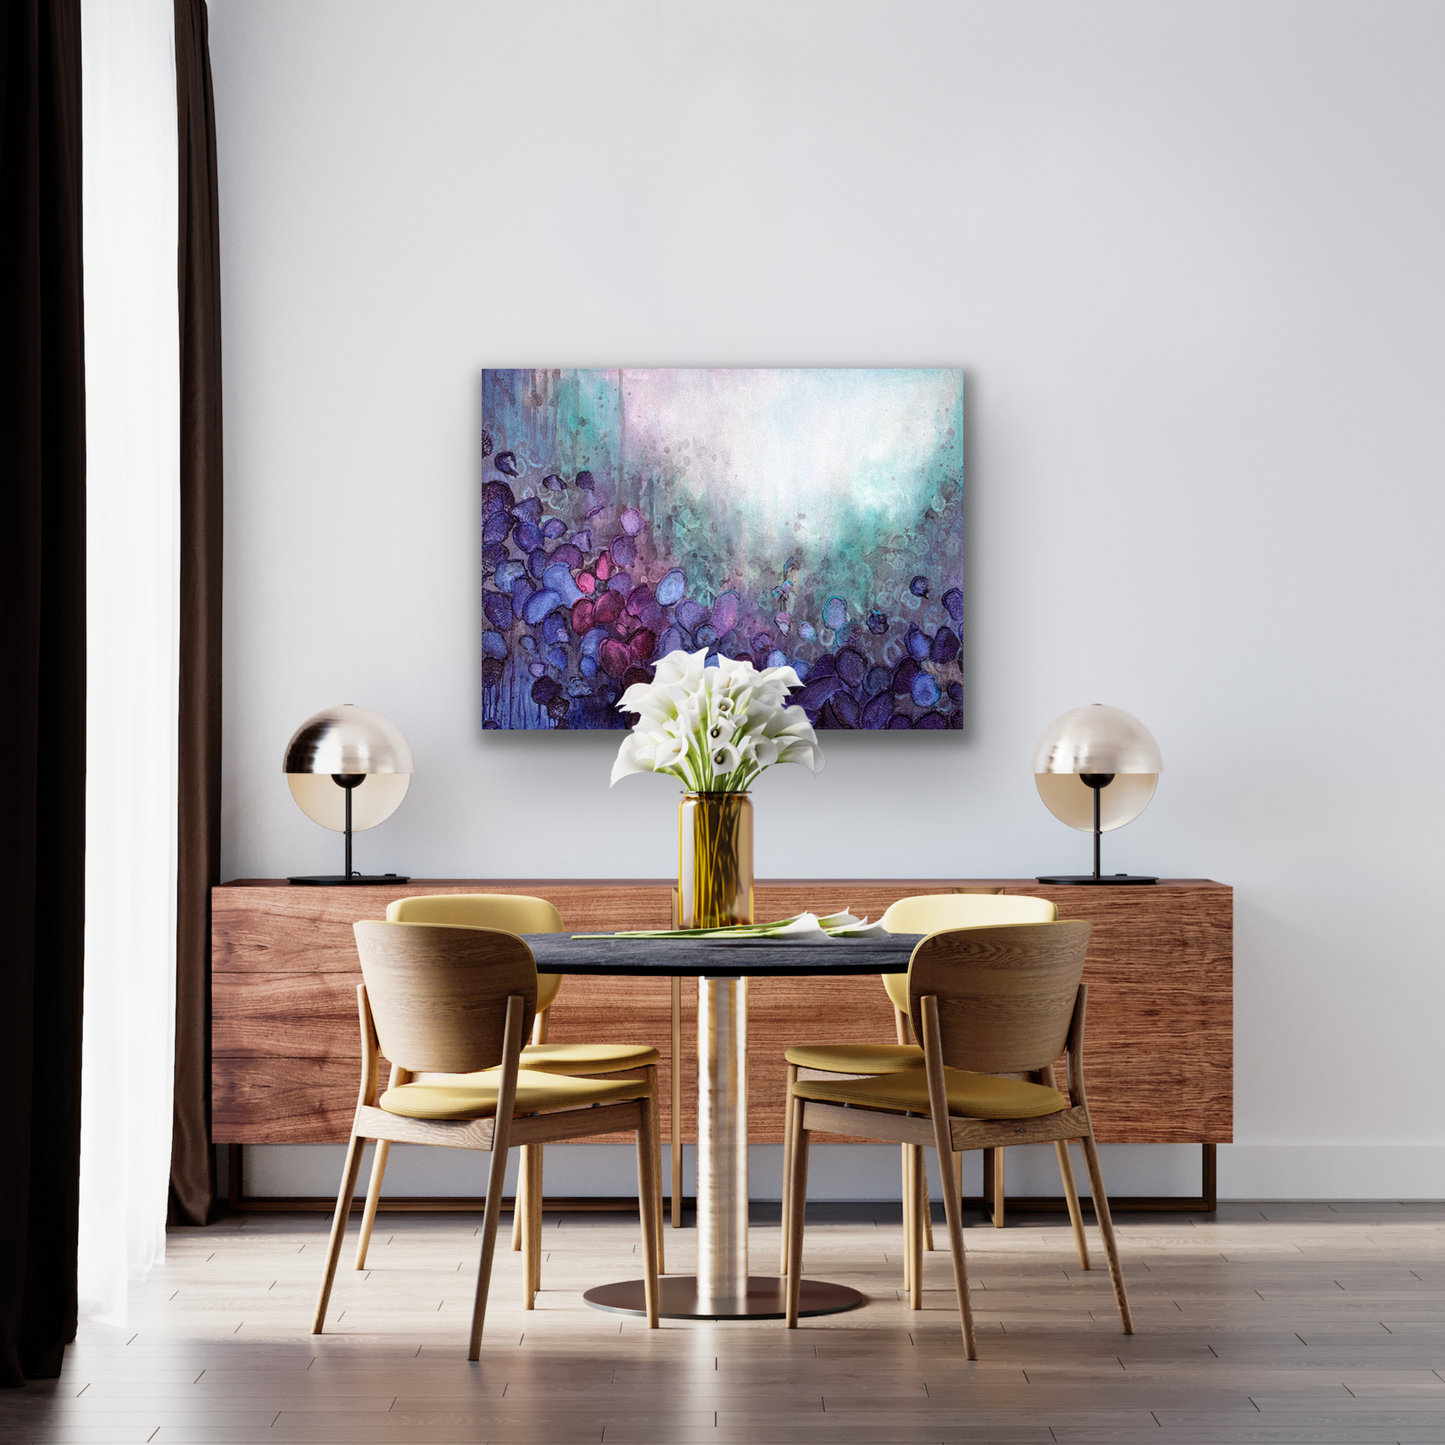 Turbulence painting will look great in your dining room.